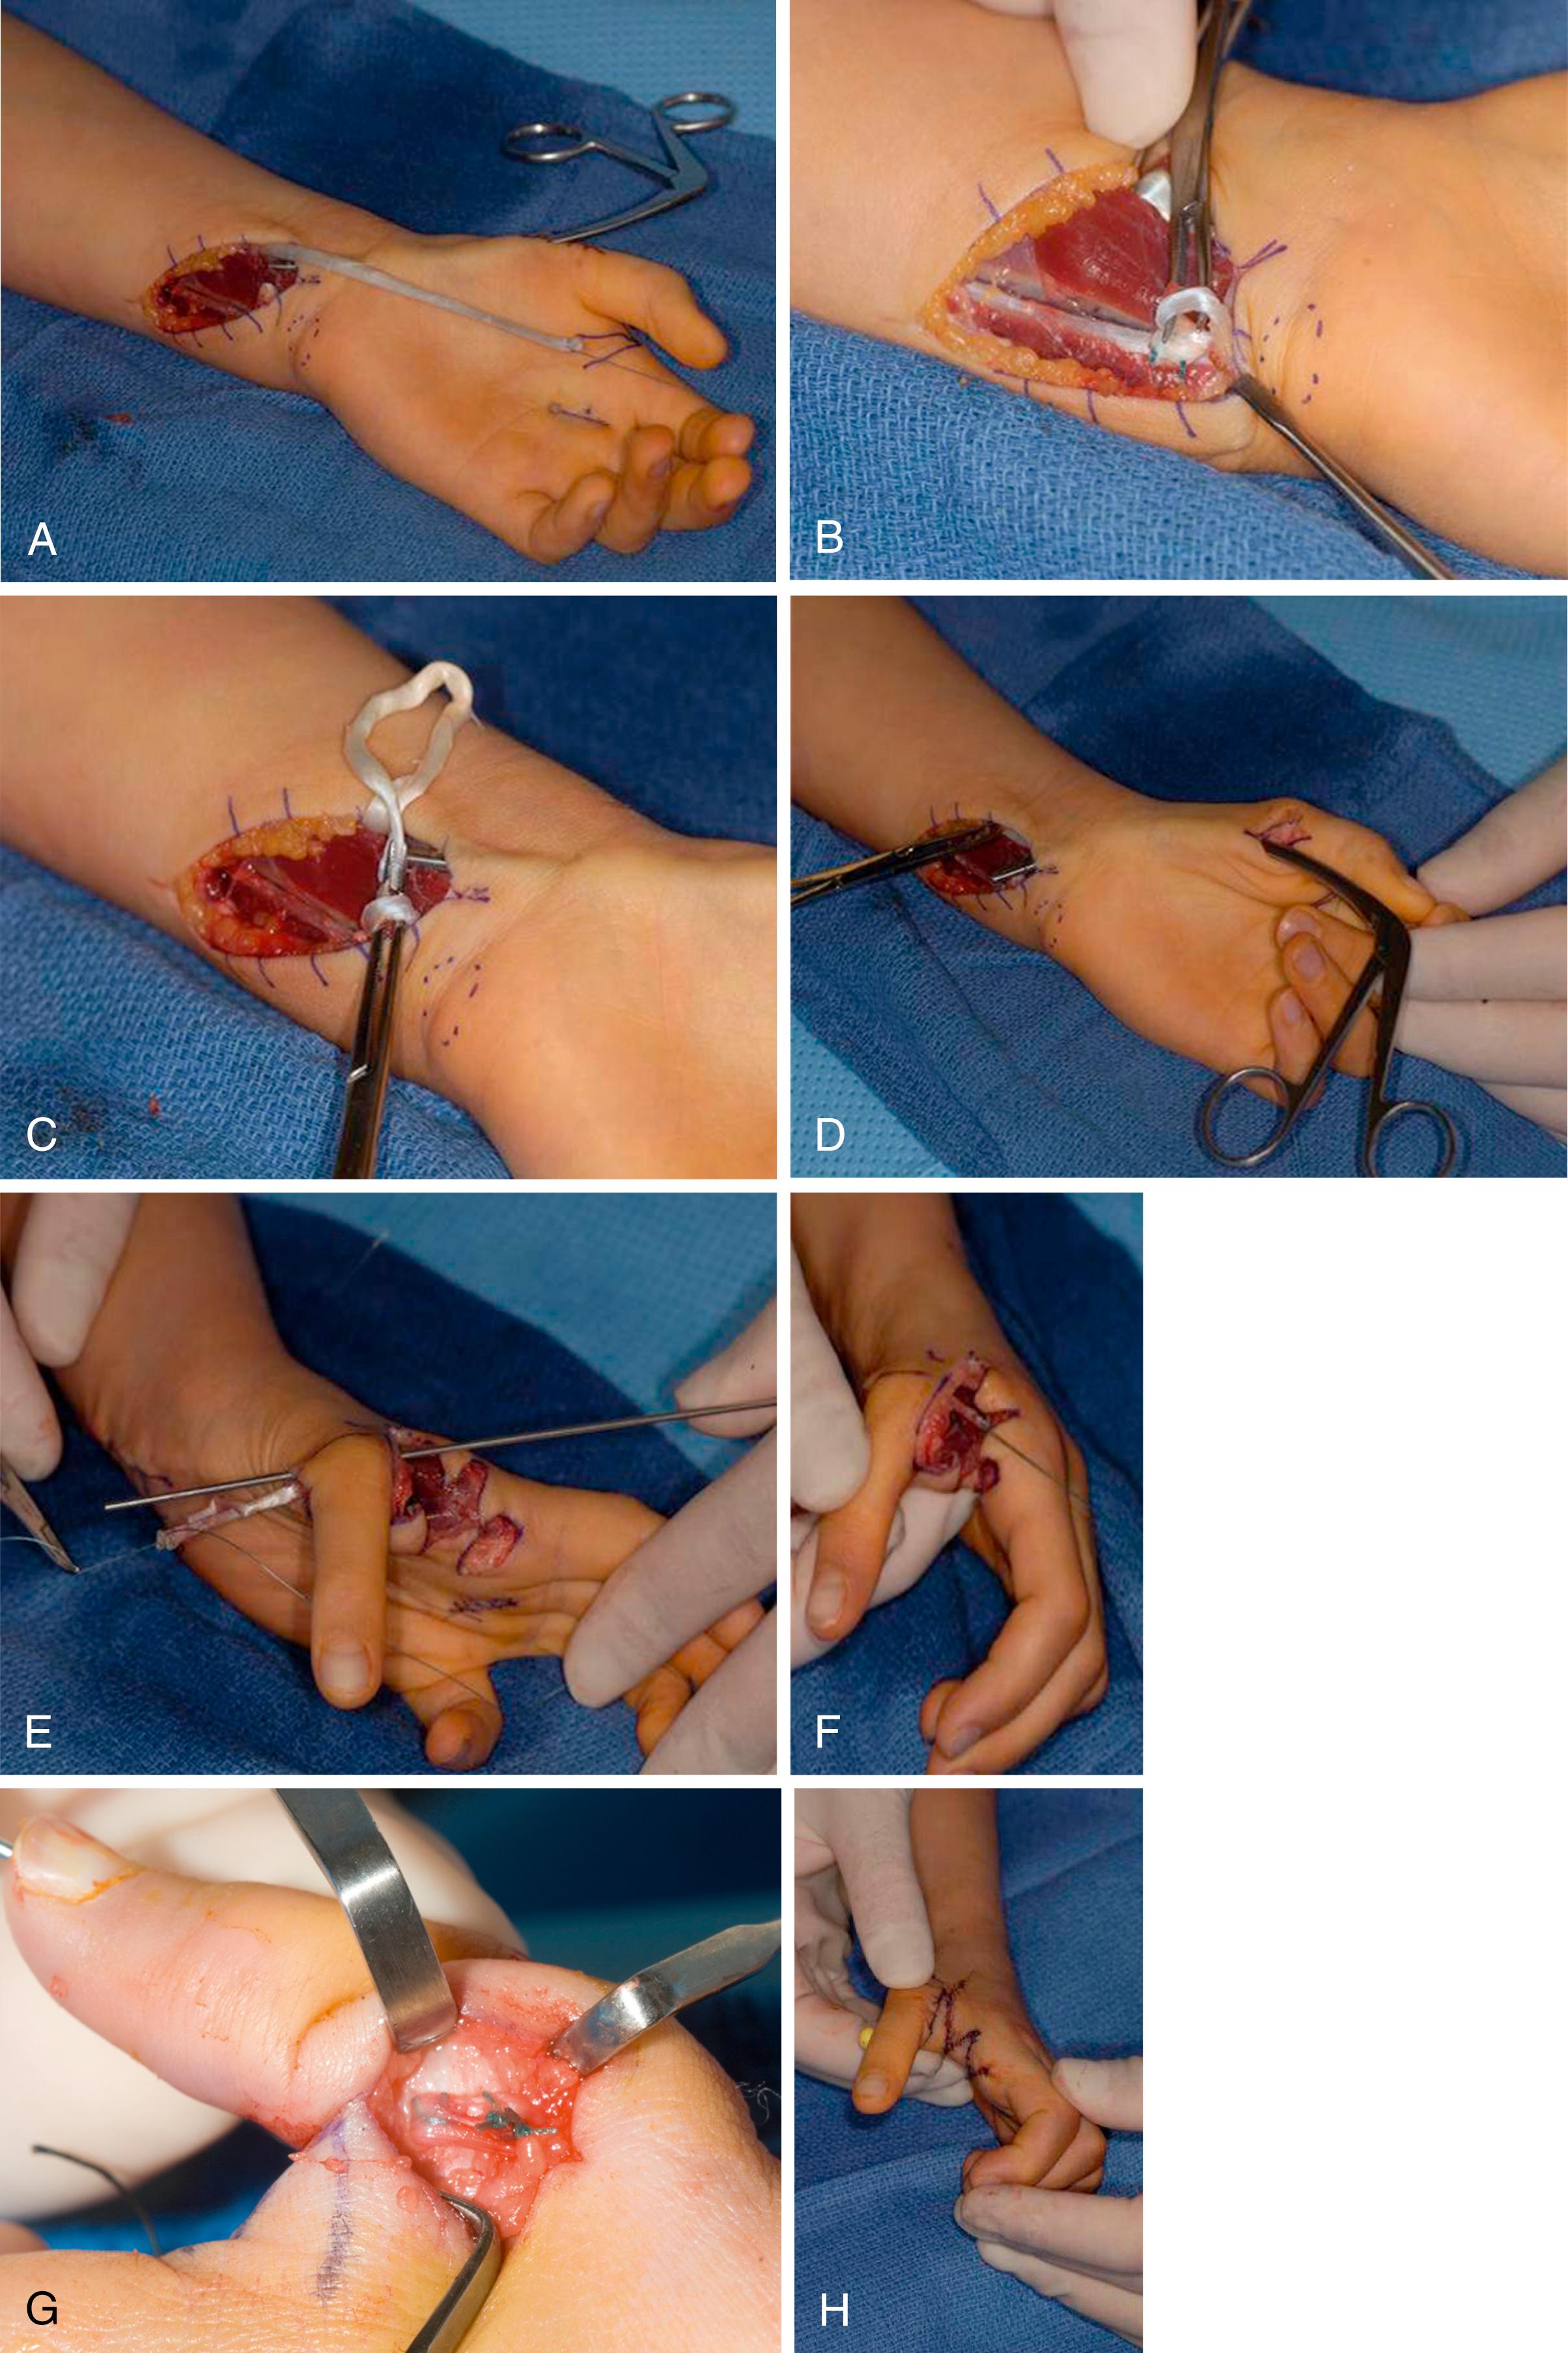 eFig. 37.2, Surgical technique. A, Flexor digitorum superficialis (FDS) harvest. B, Flexor carpi ulnaris pulley. C, FDS through pulley. D, FDS through subcutaneous tunnel. E, FDS through metacarpal head. F, FDS along ulnar metacarpophalangeal joint. G, Ulnar collateral ligament reconstruction. H, Pinning and four-flap Z-plasty closure.